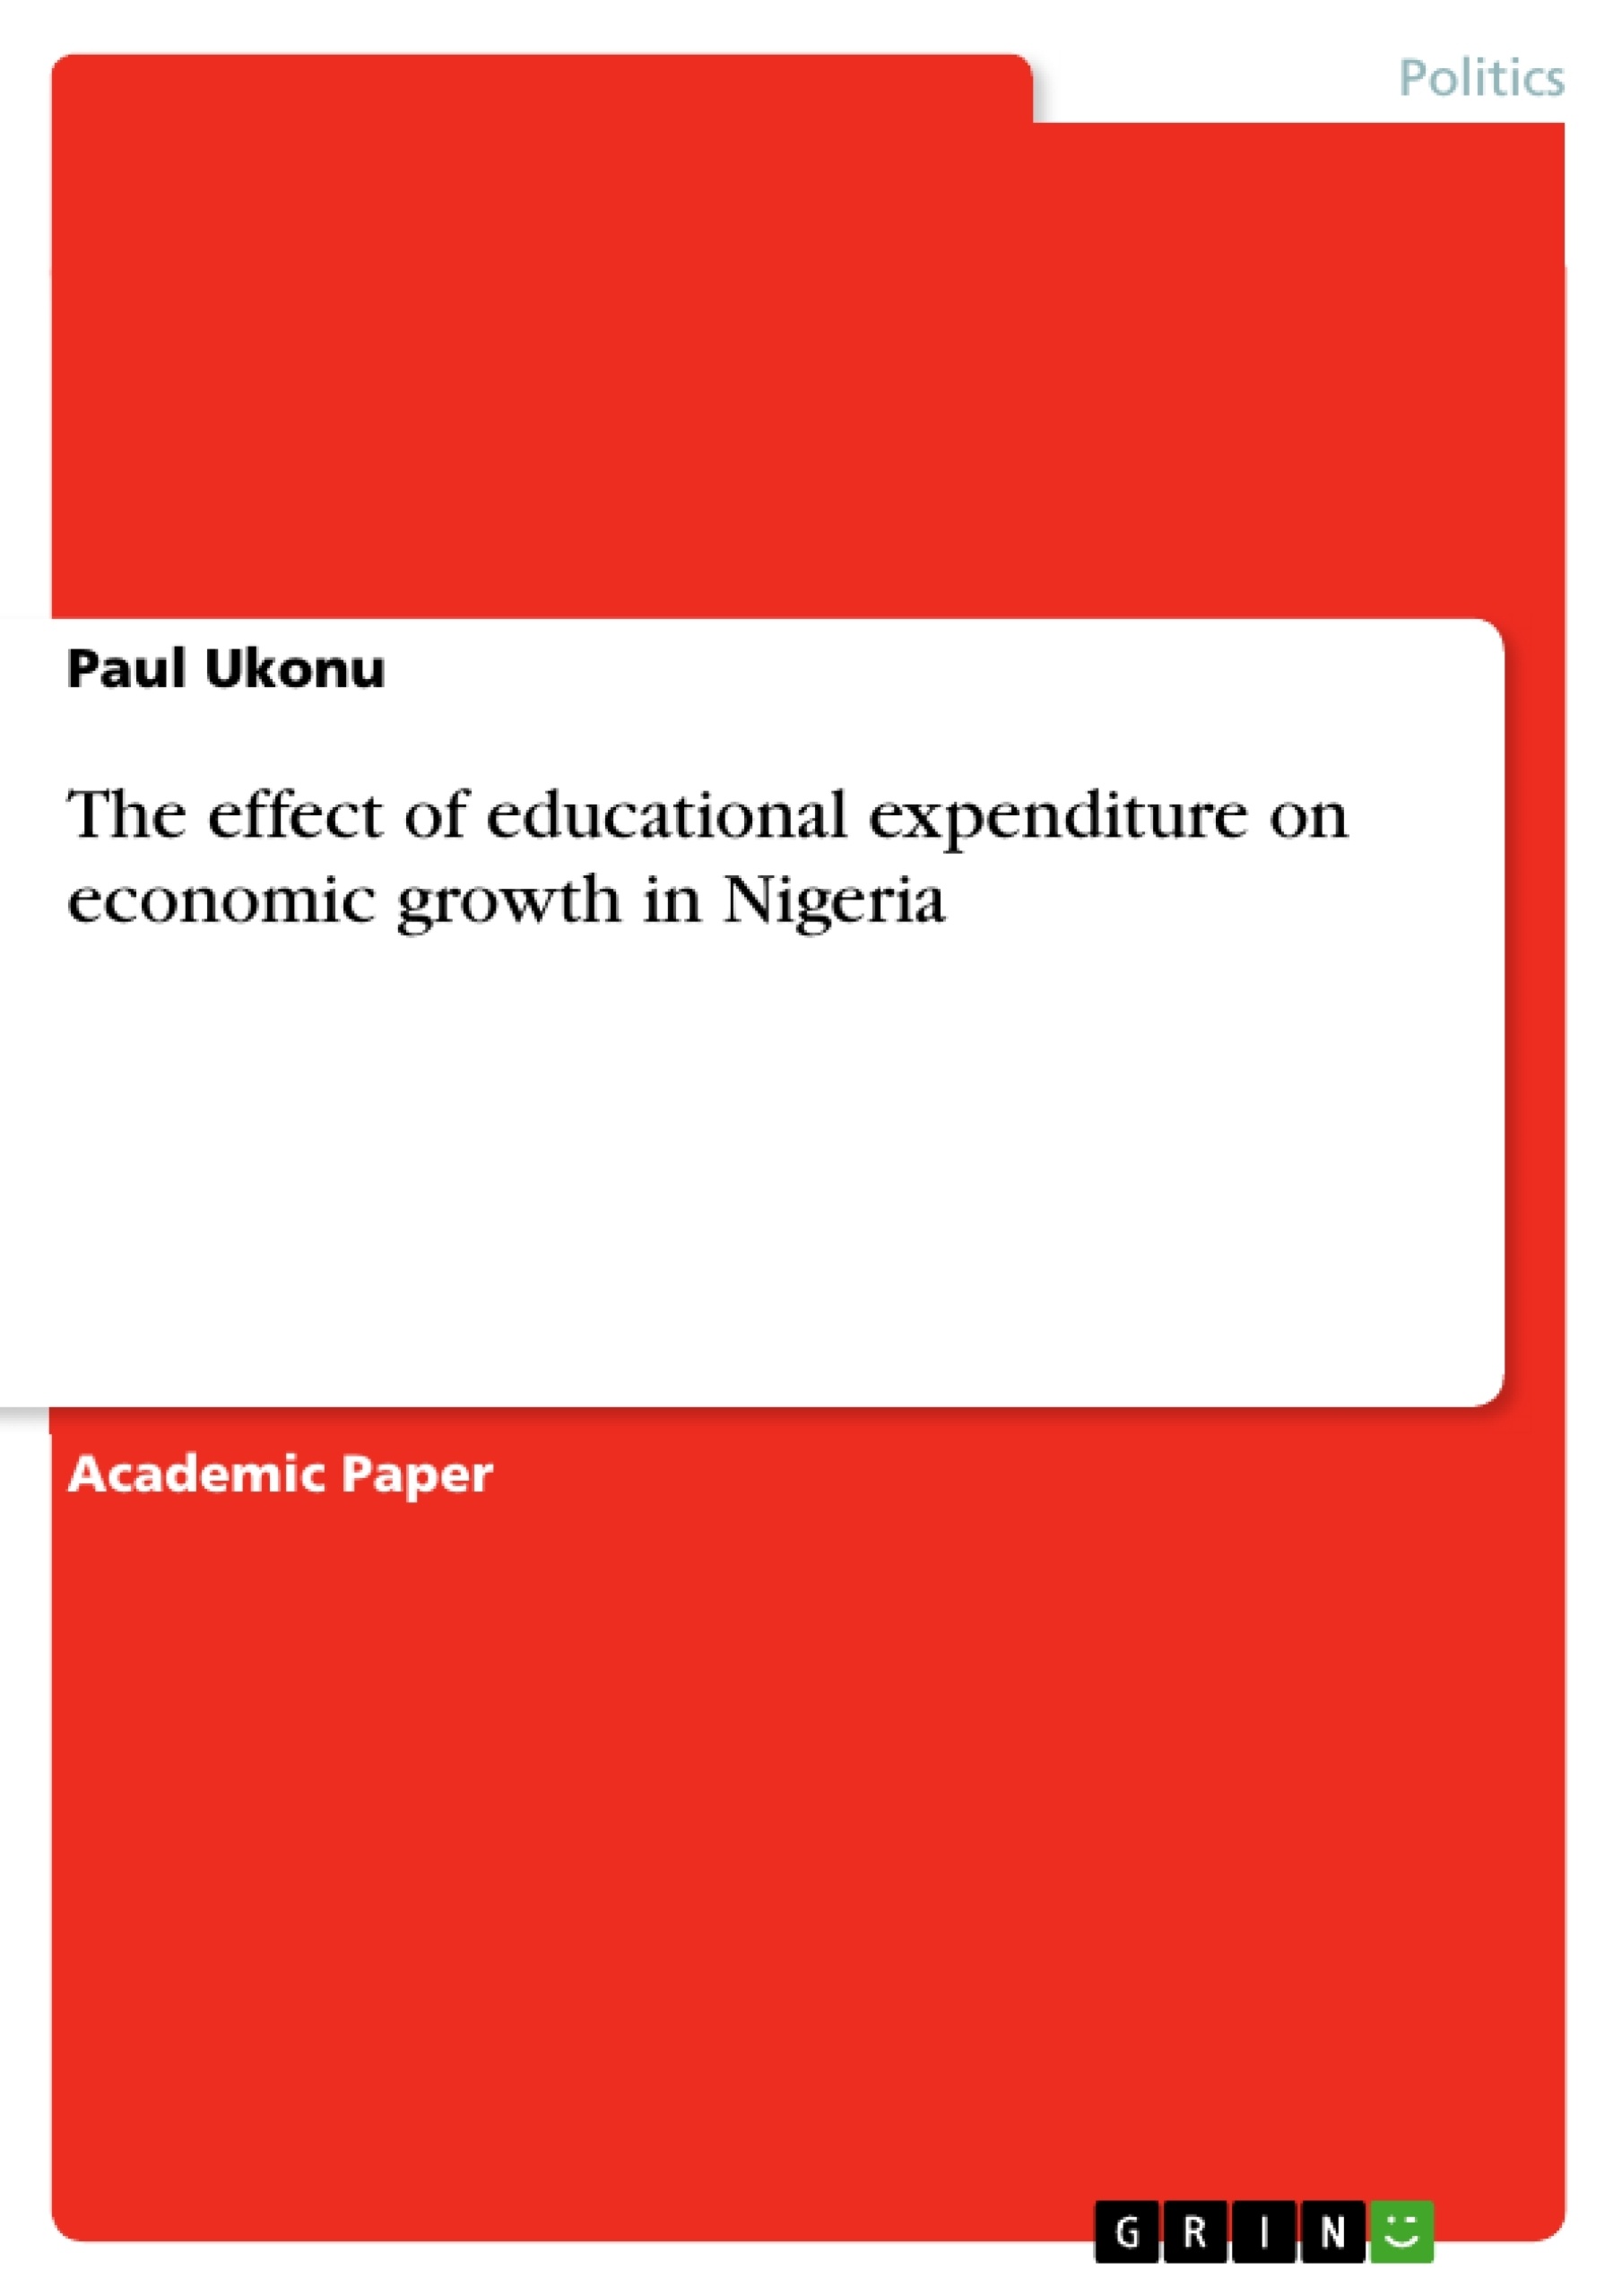 Title: The effect of educational expenditure on economic growth in Nigeria